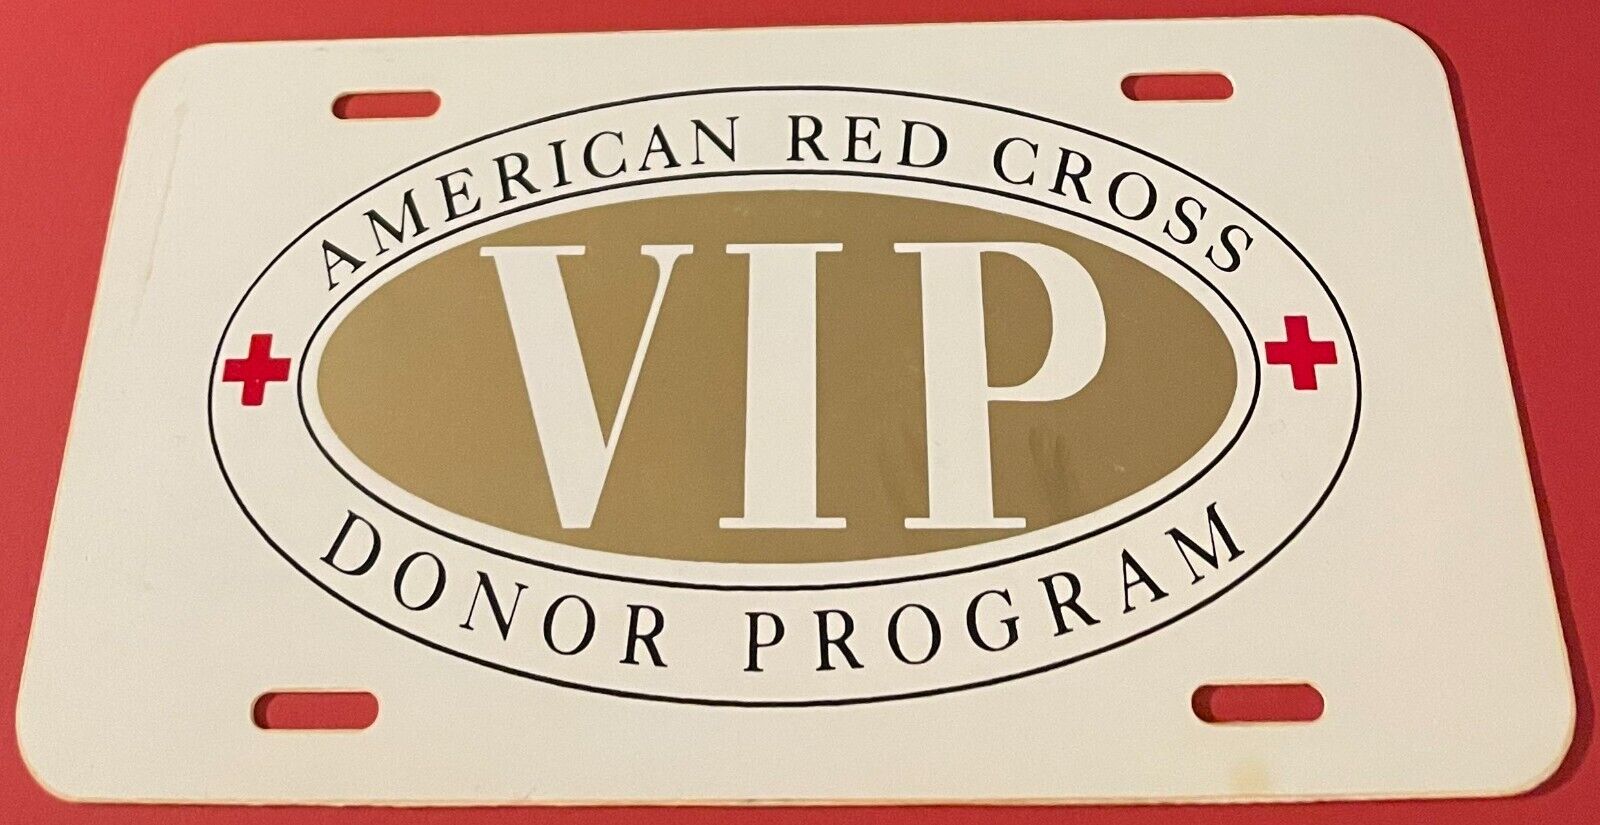 American Red Cross VIP Donor Program Booster License Plate Blood Donor PLASTIC